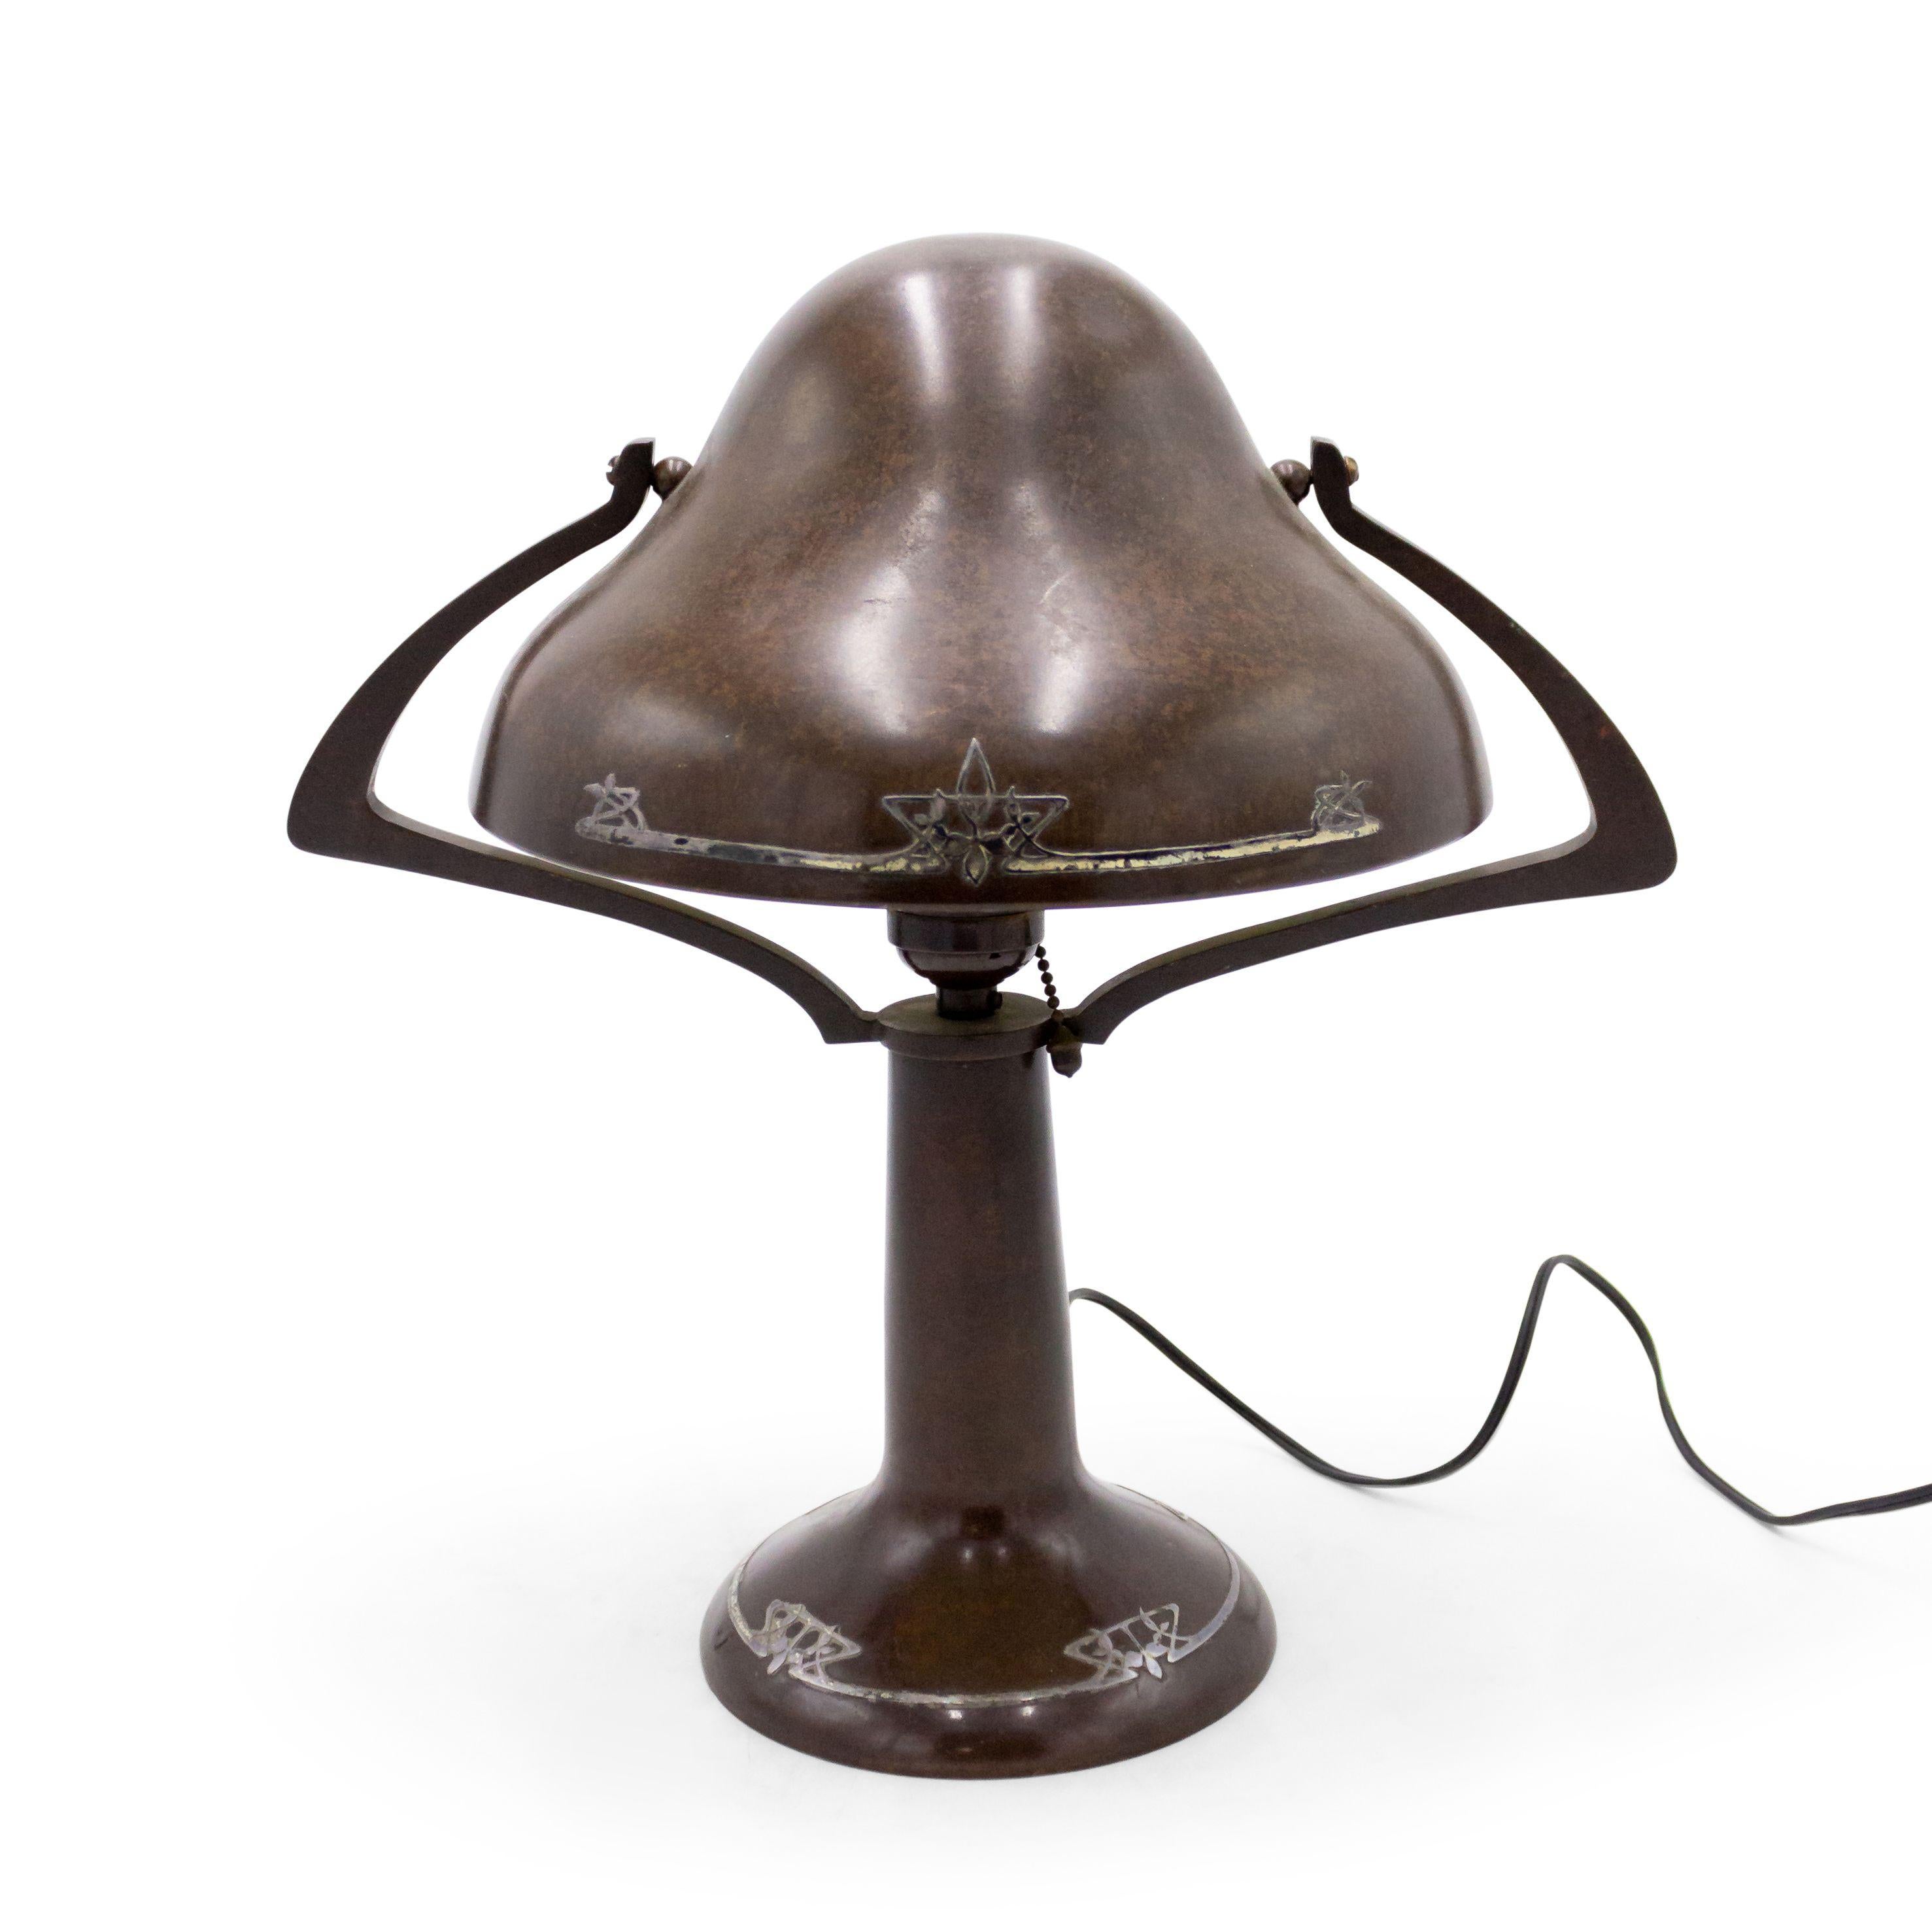 American Mission bronze patinated table lamp with floral whiplash silver deposit base and helmet shaped shade (HEINTZ ART METAL).
